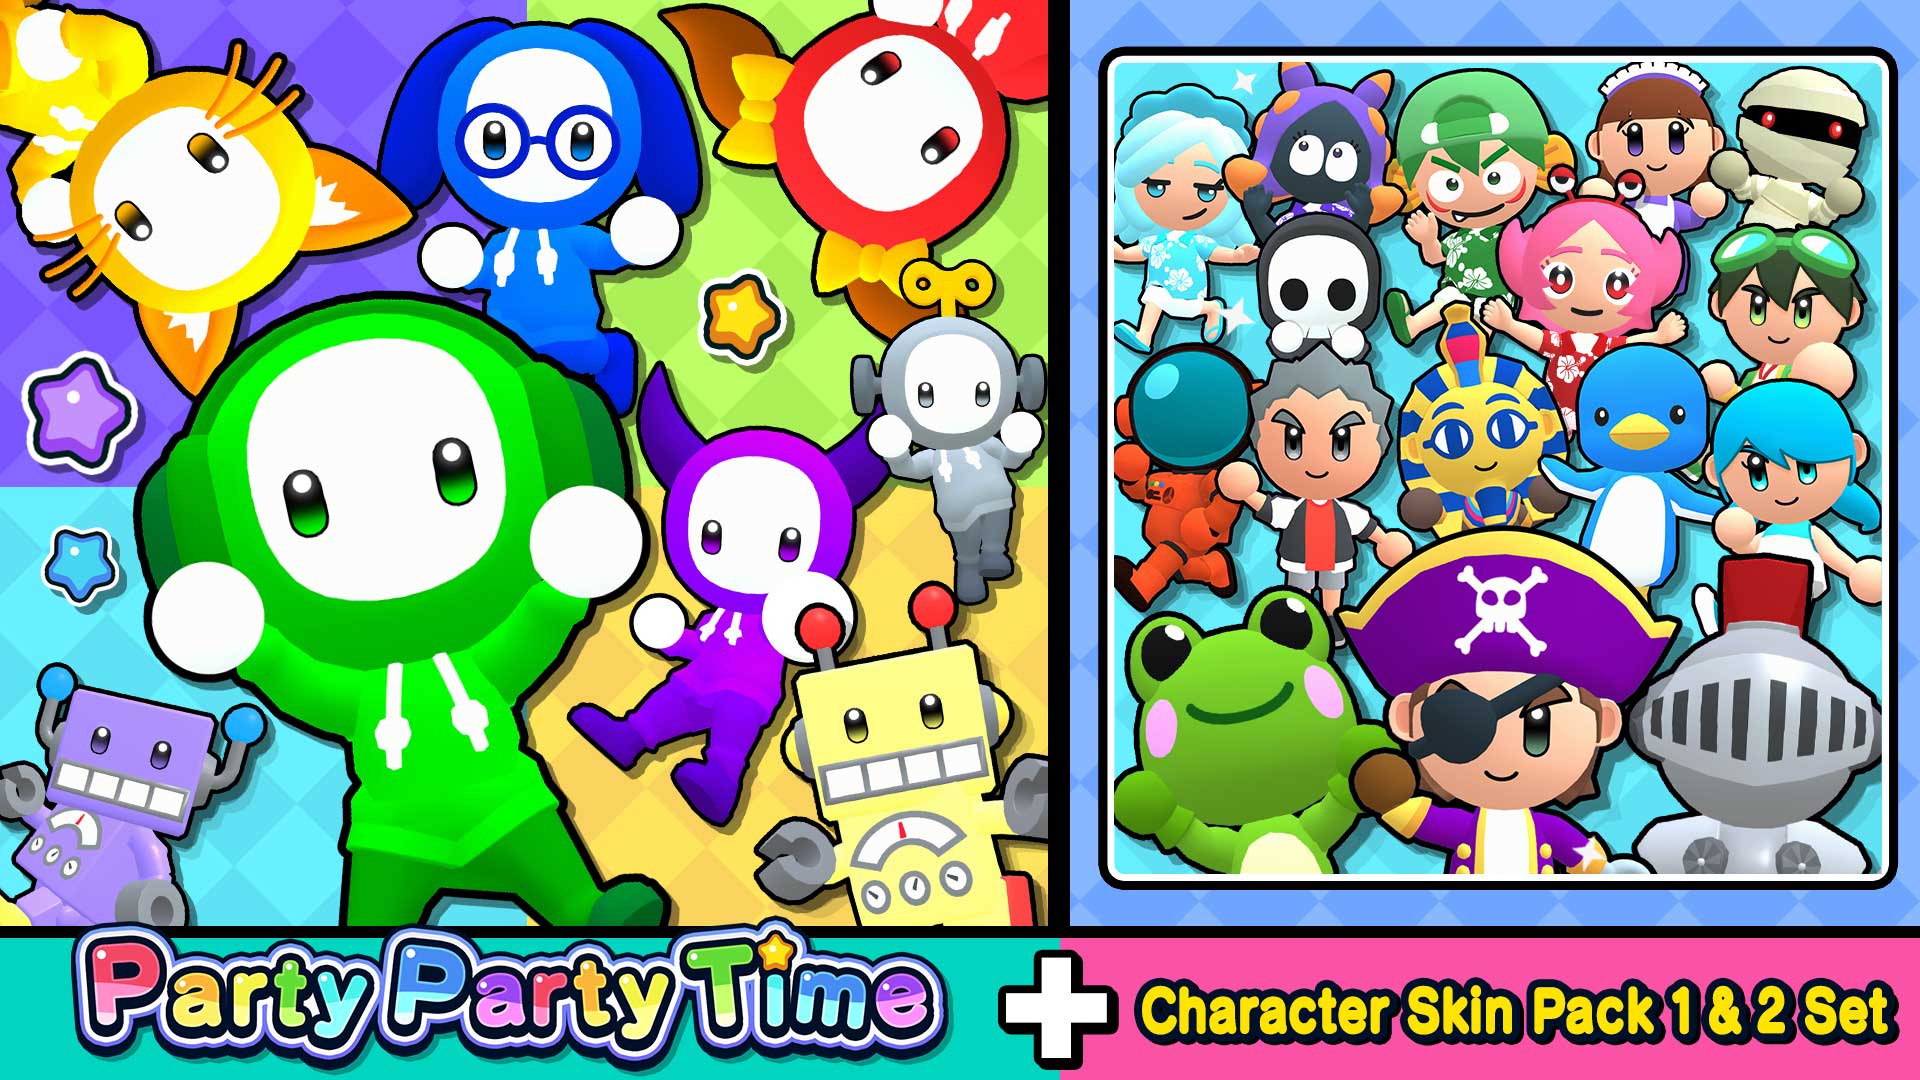 Party Party Time + Character Skin Pack 1 & 2 Set